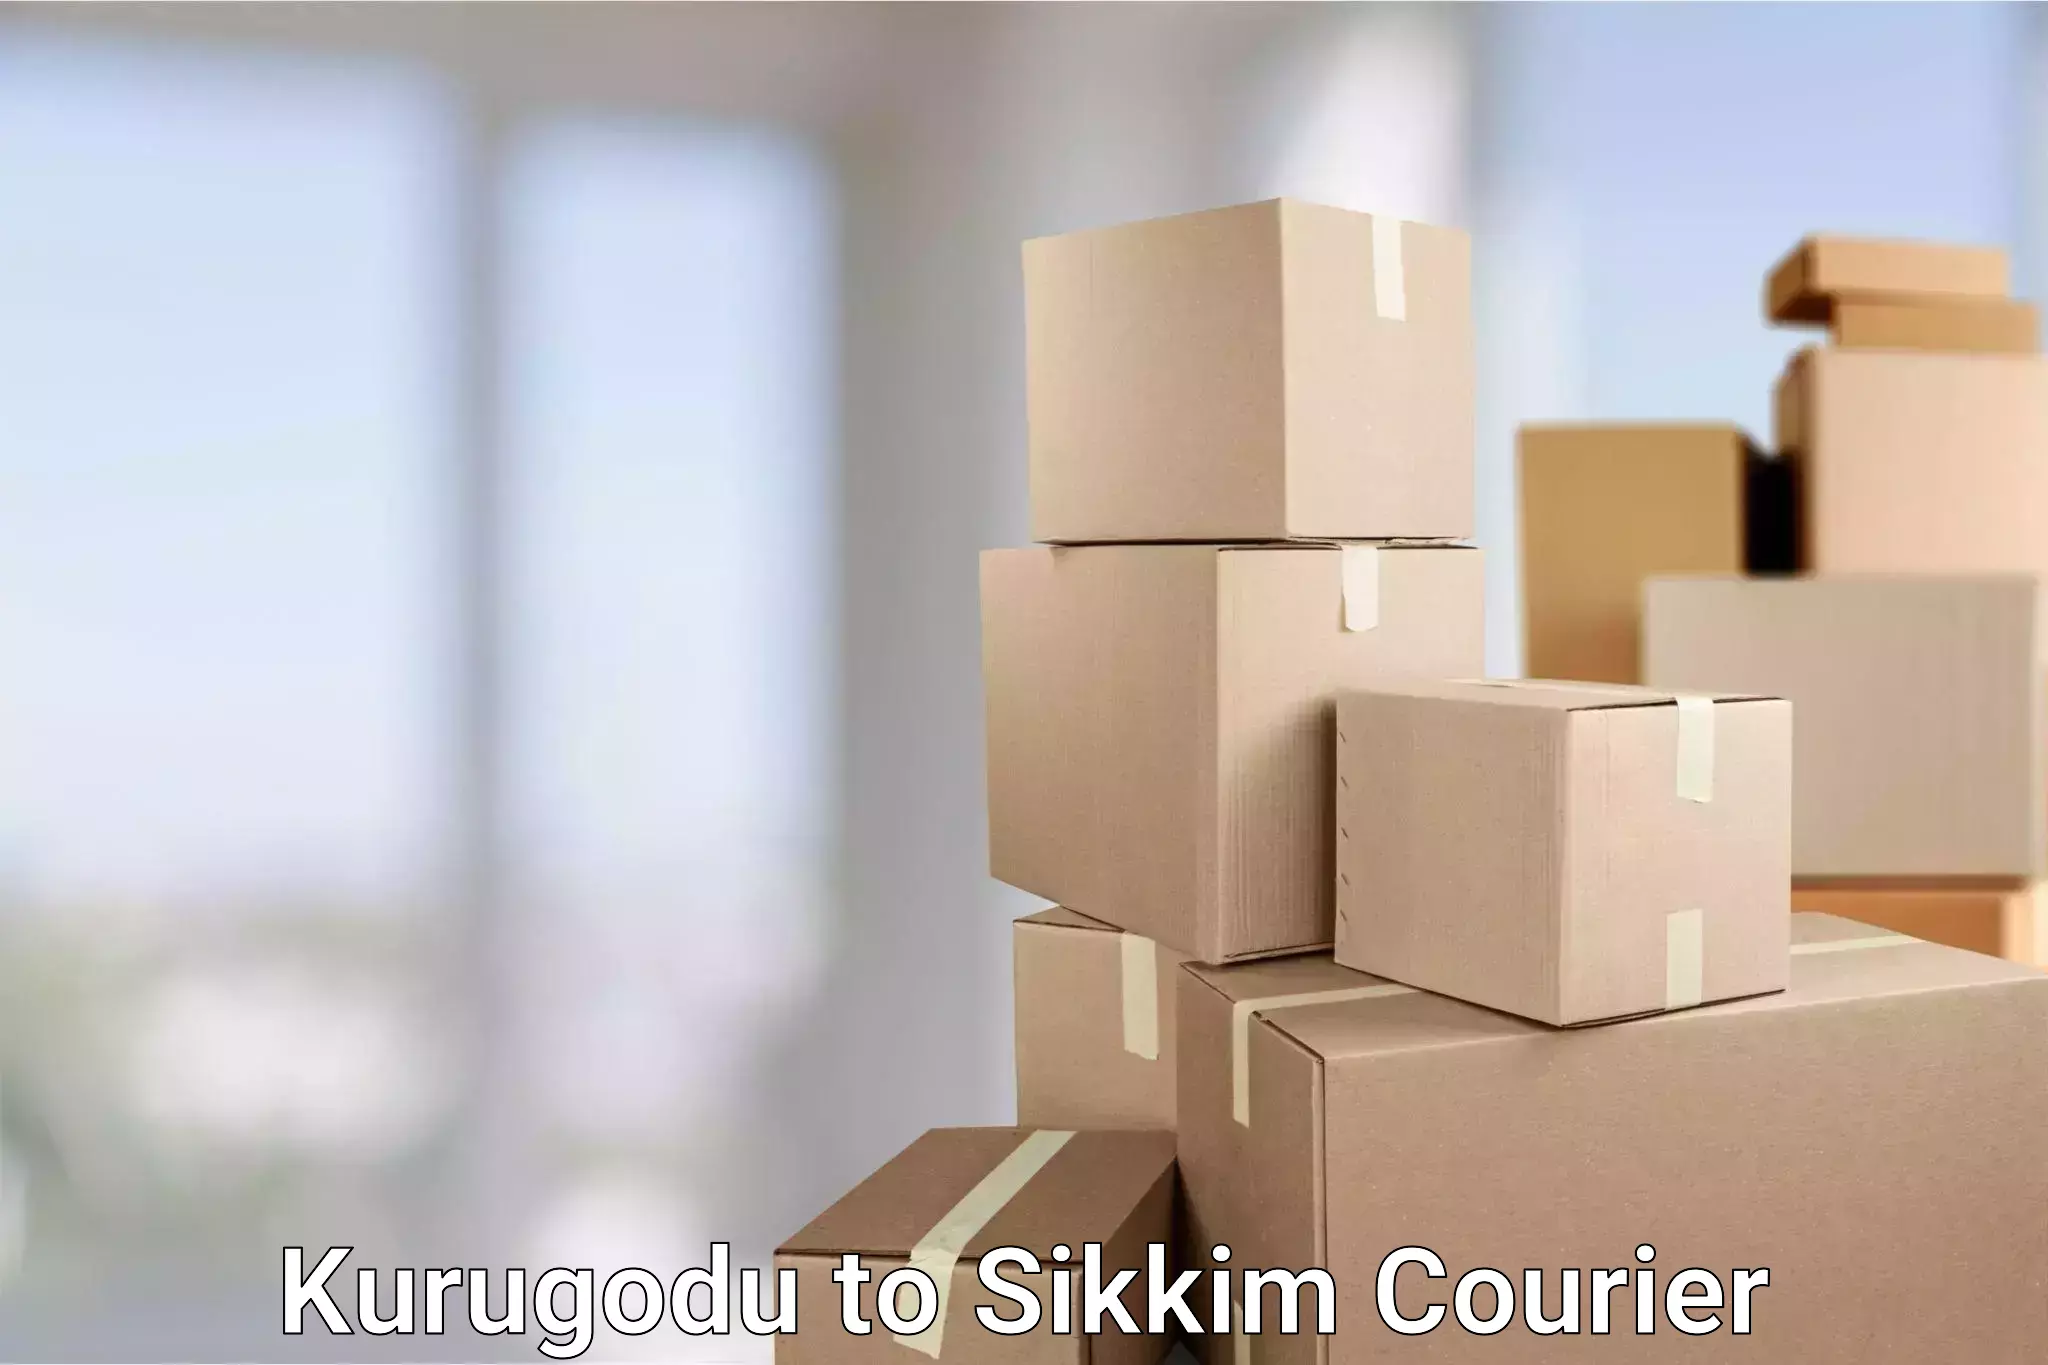 State-of-the-art courier technology Kurugodu to North Sikkim